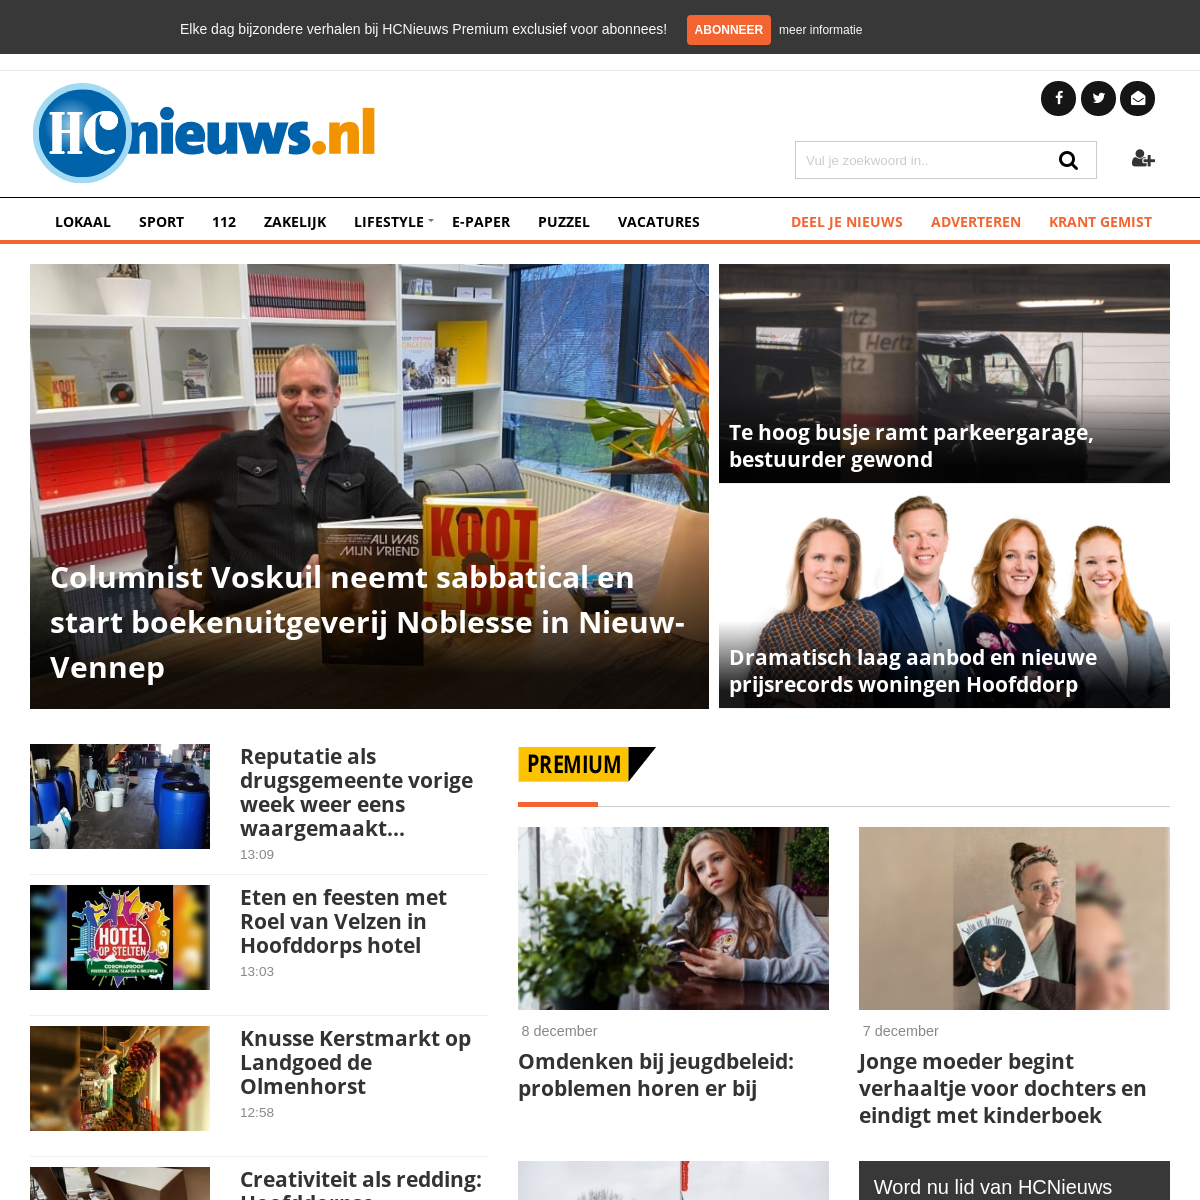 A complete backup of hcnieuws.nl